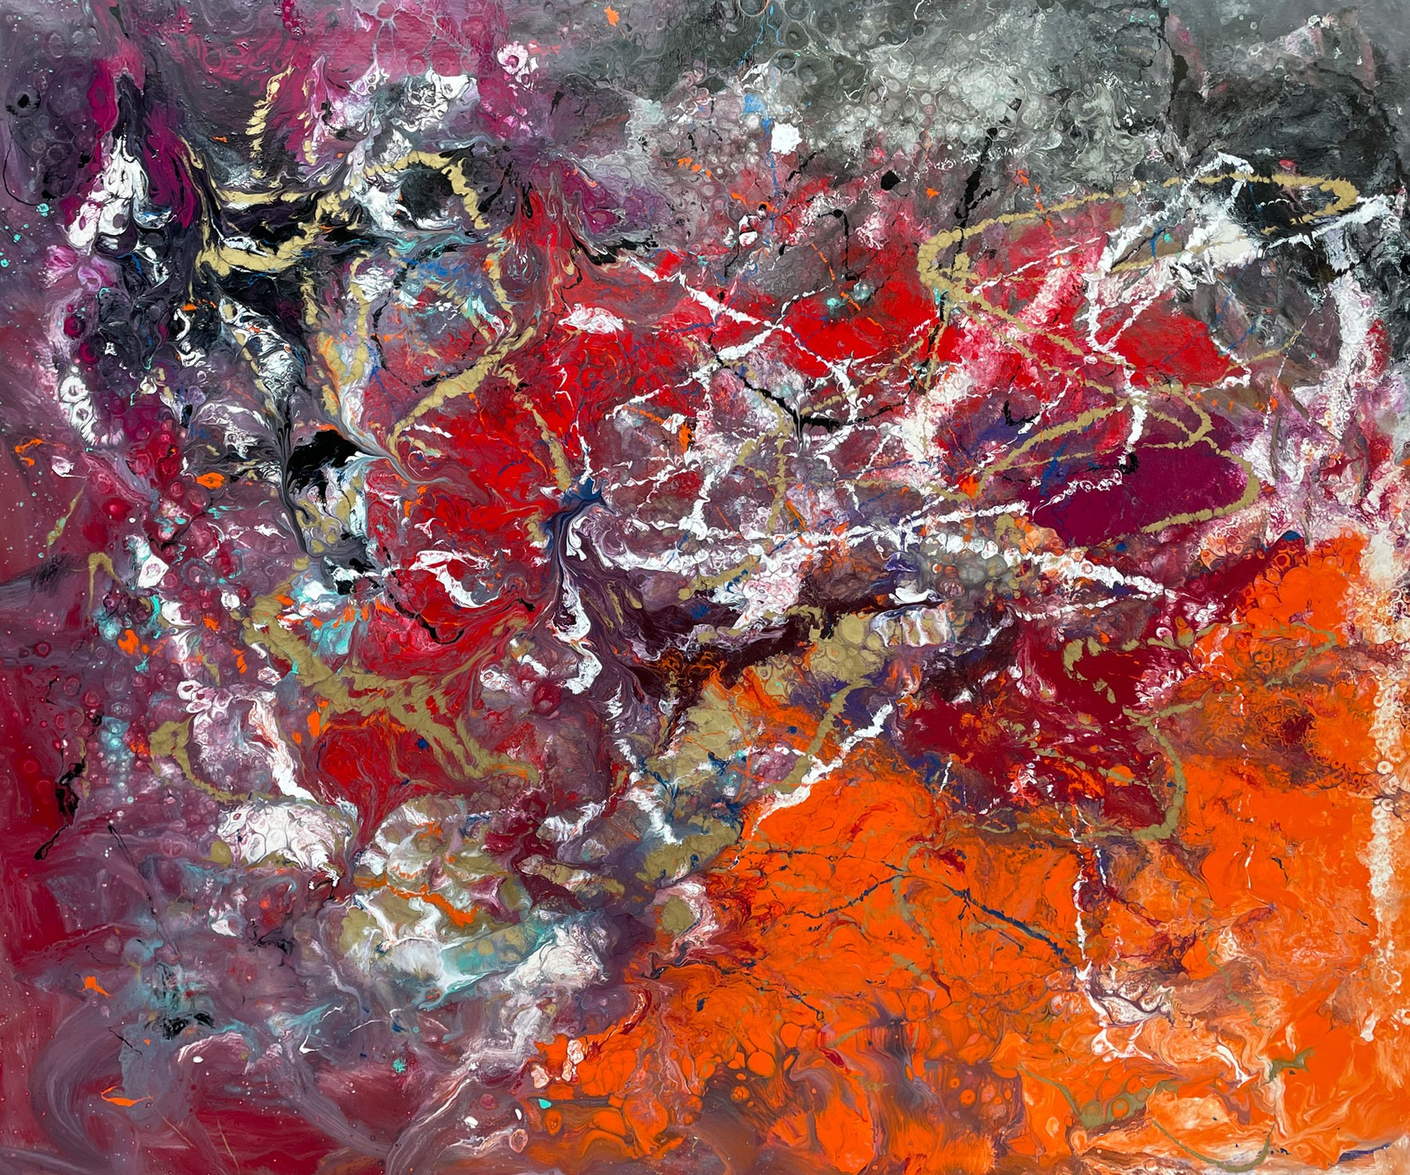 Large orange and pink abstract painting with silver and purple accents